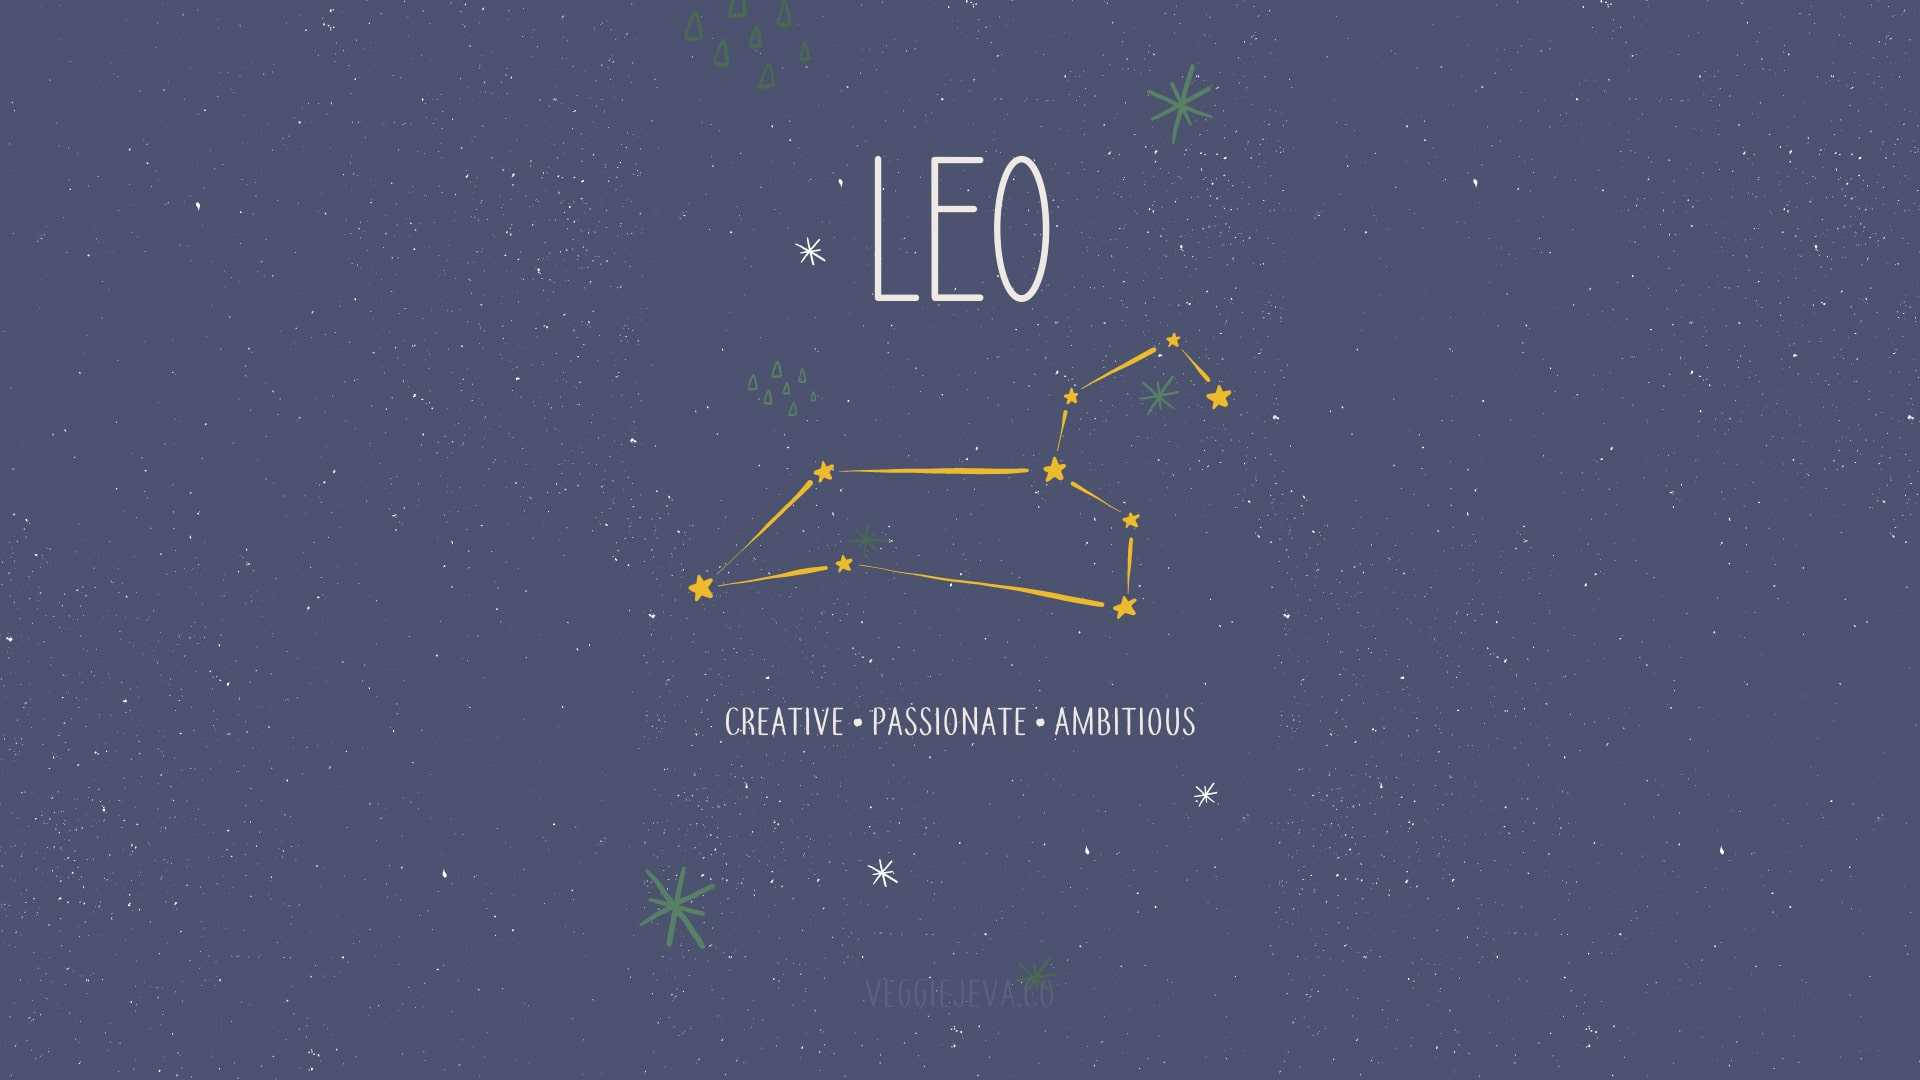 Leo Constellation And Qualities Wallpaper